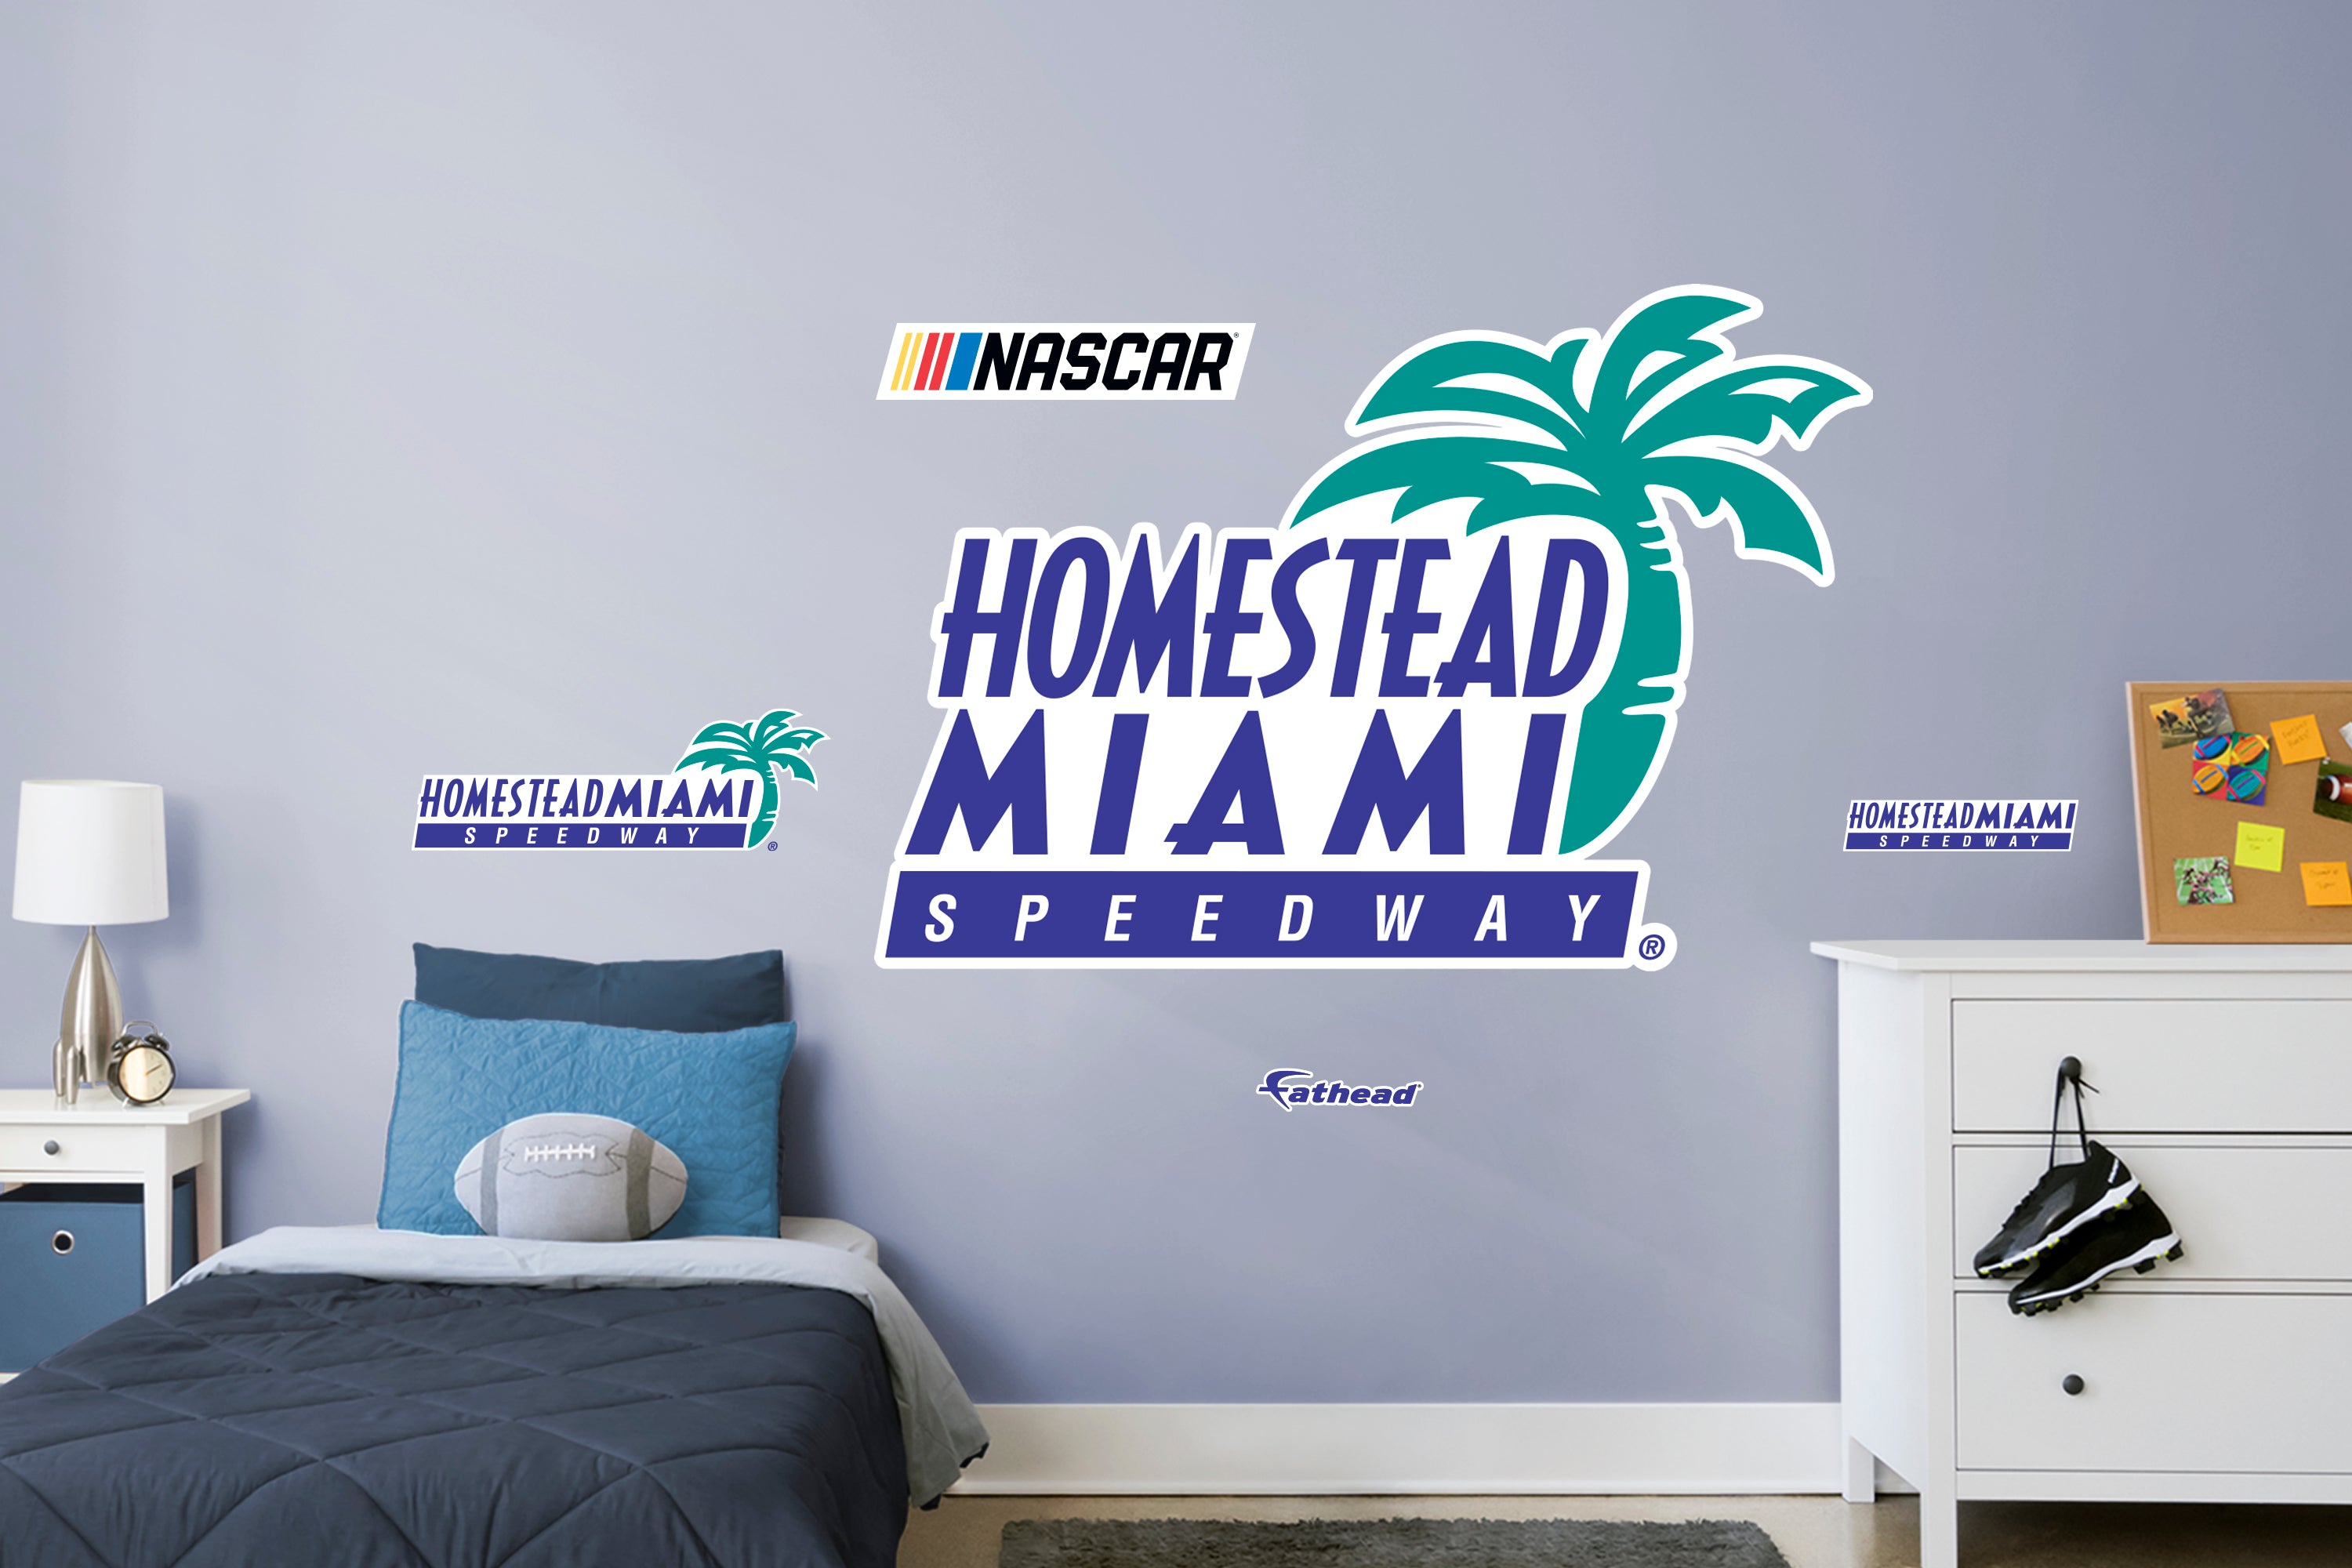 Homestead-Miami Speedway 2021 Logo - Officially Licensed NASCAR Removable Wall Decal Giant Logo + 4 Decals (51"W x 35"H) by Fath